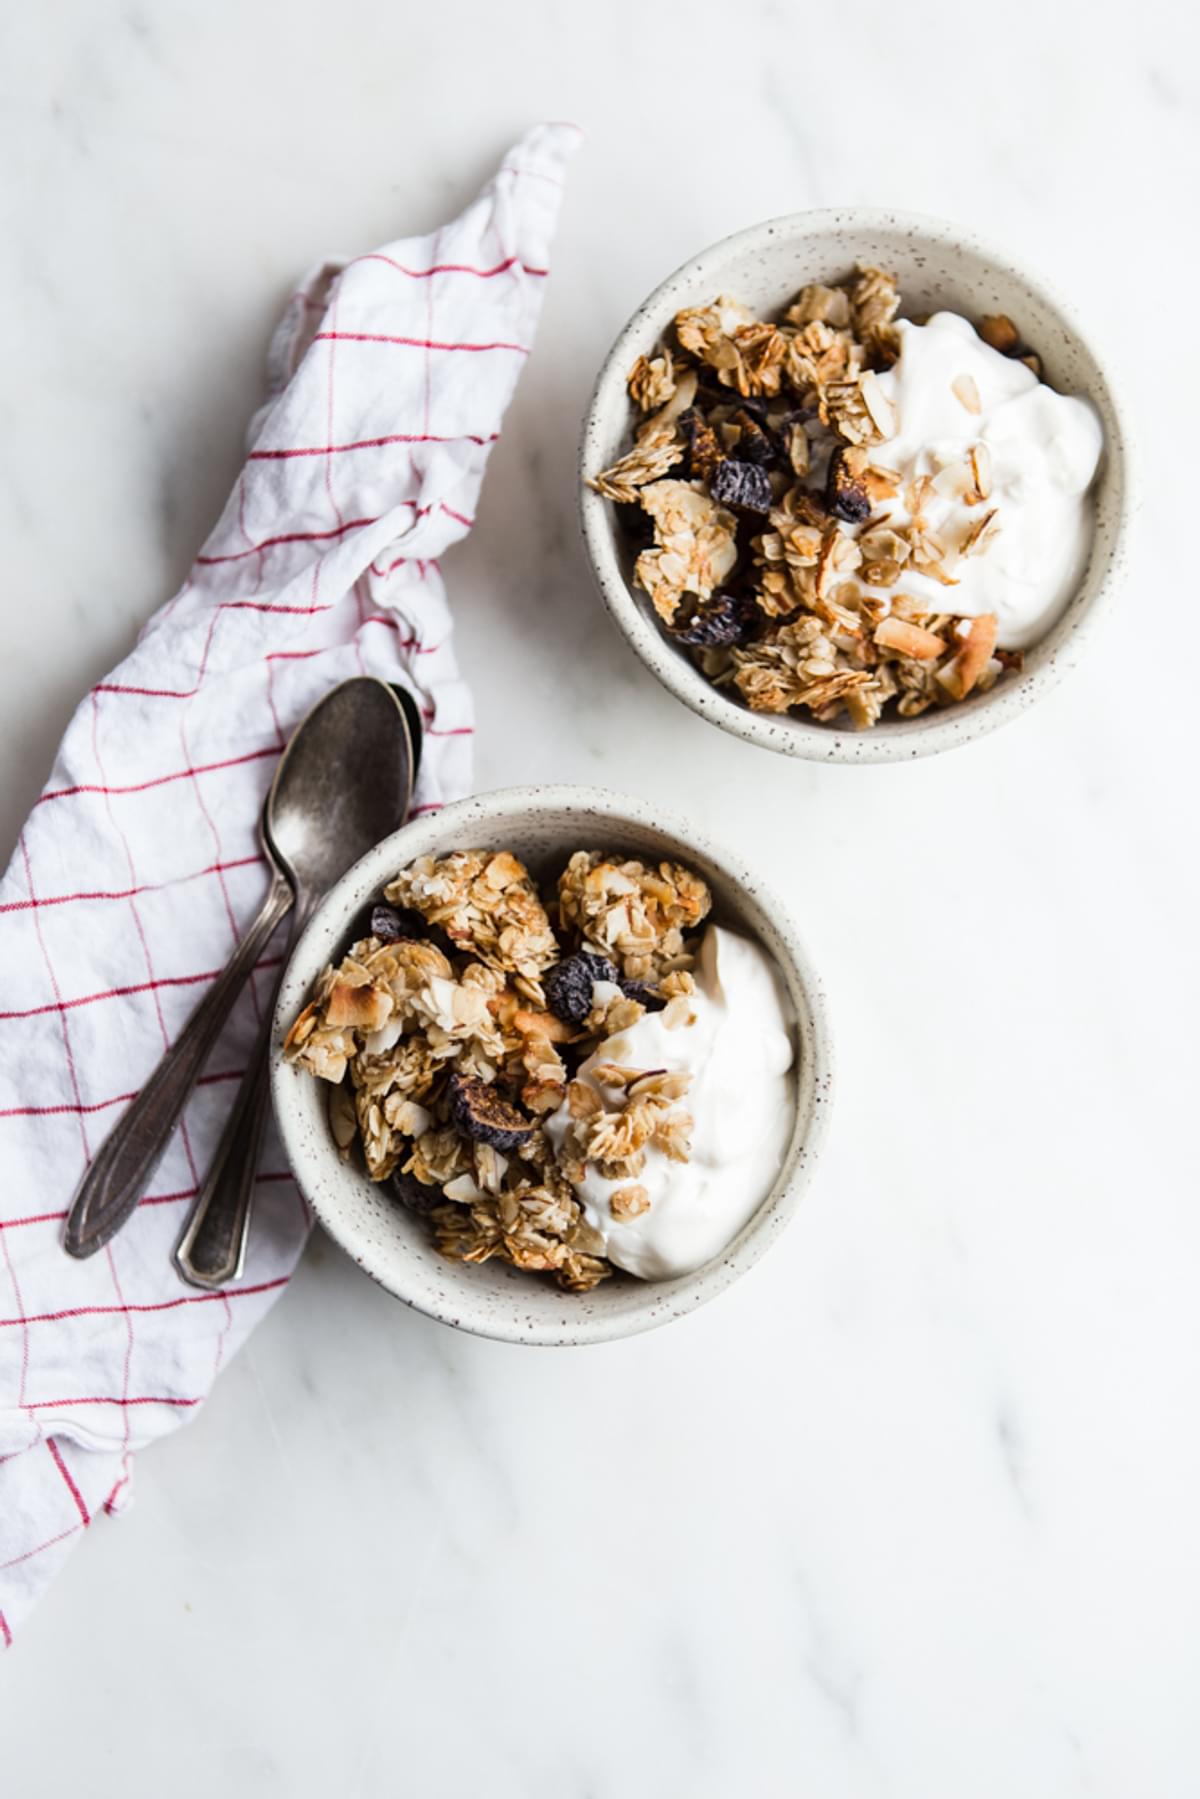 2 bowls of homemade Granola with Figs, Almonds and Coconut with yogurt